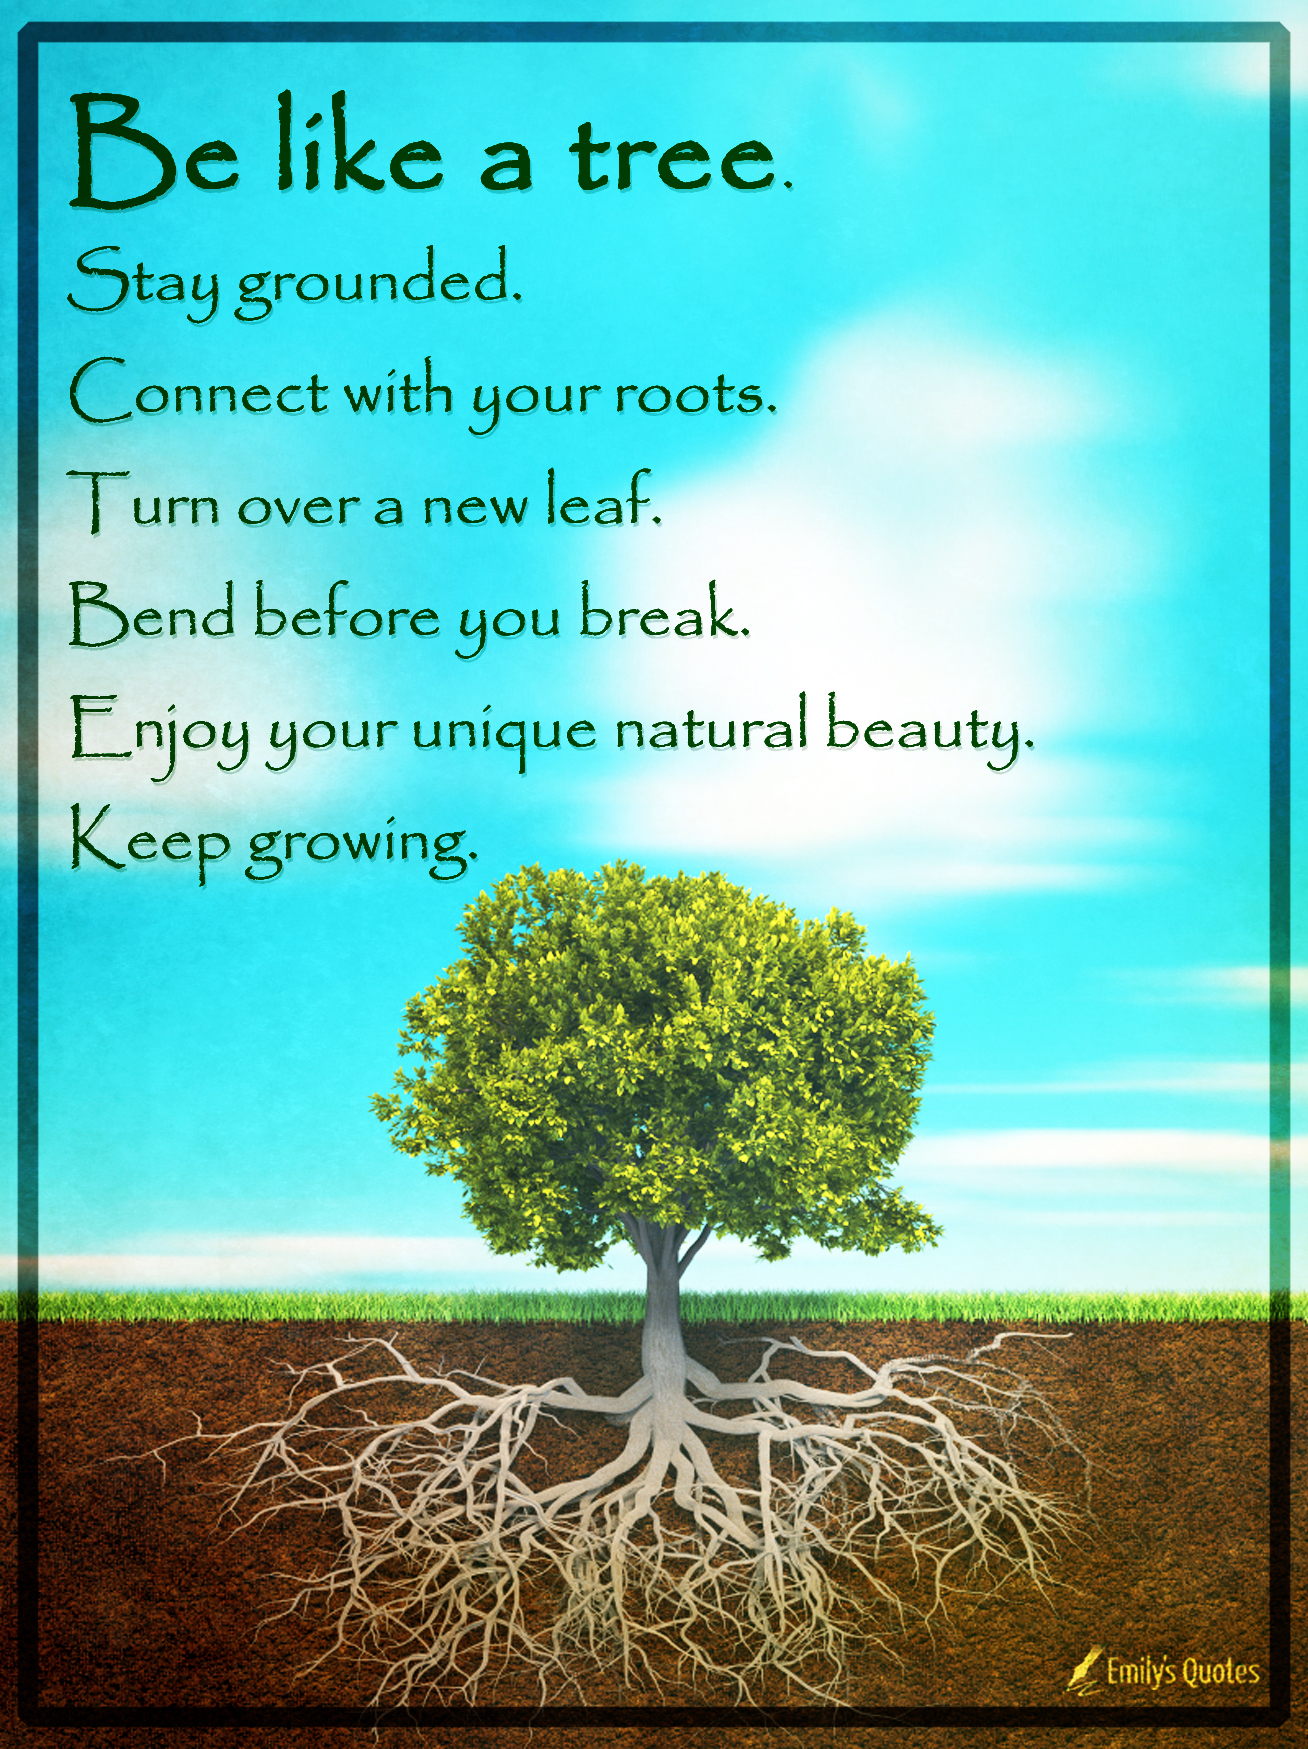 Be like a tree. Stay grounded. Connect with your roots. Turn over a new